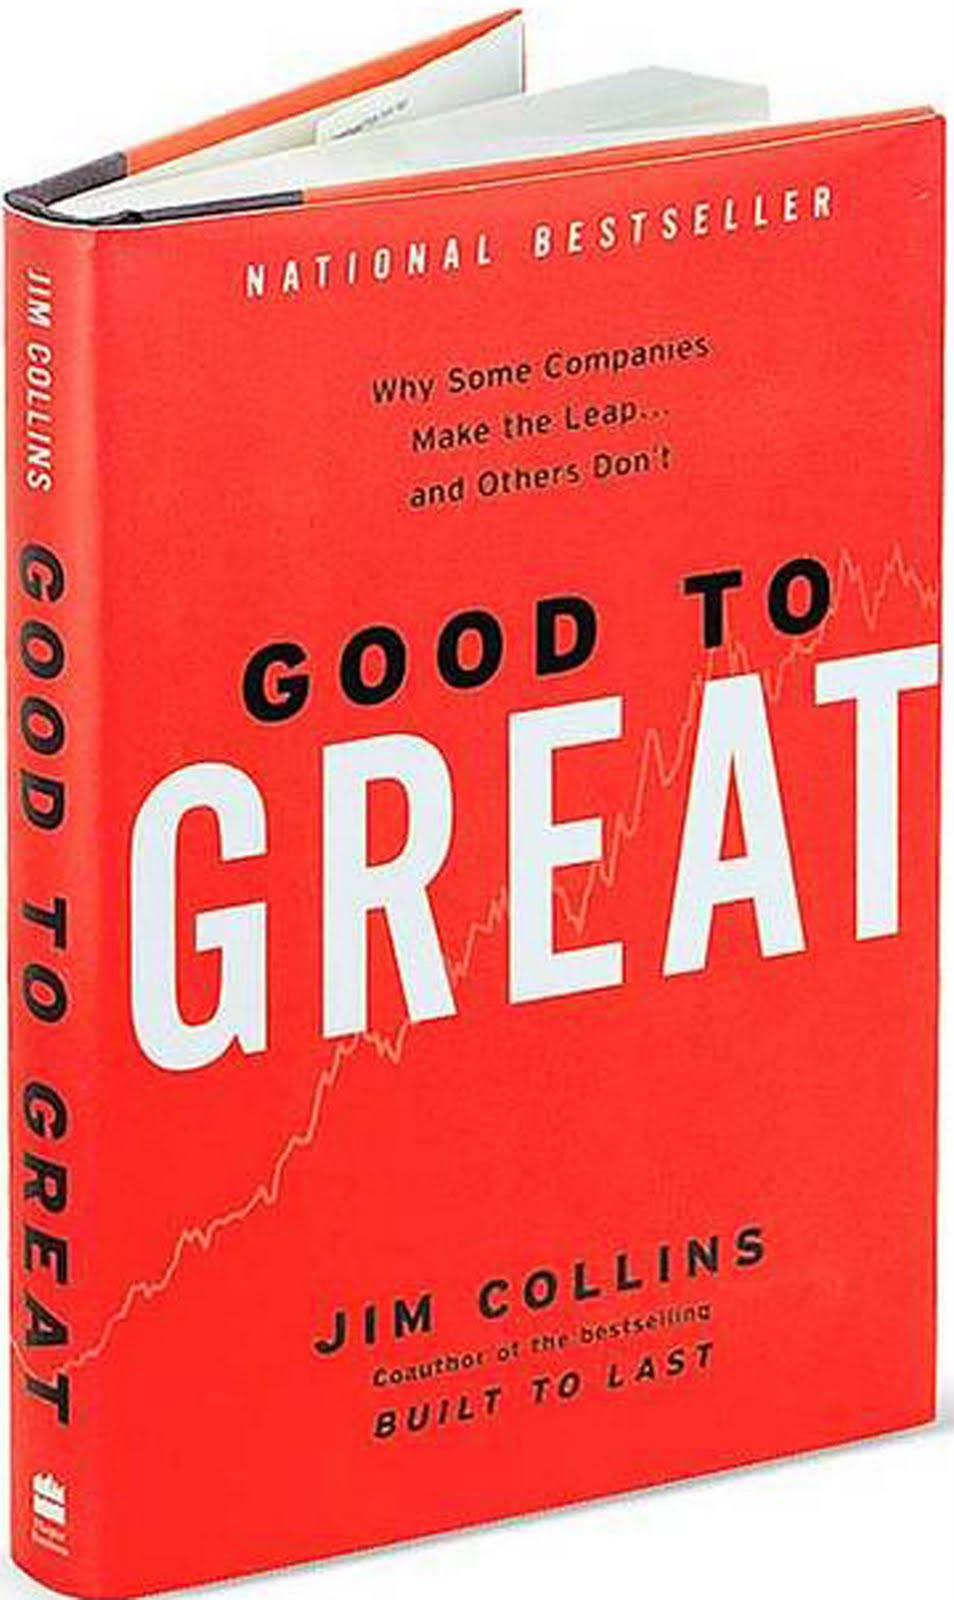 Book Review: Good to Great – Why Some Companies Make the Leap... and